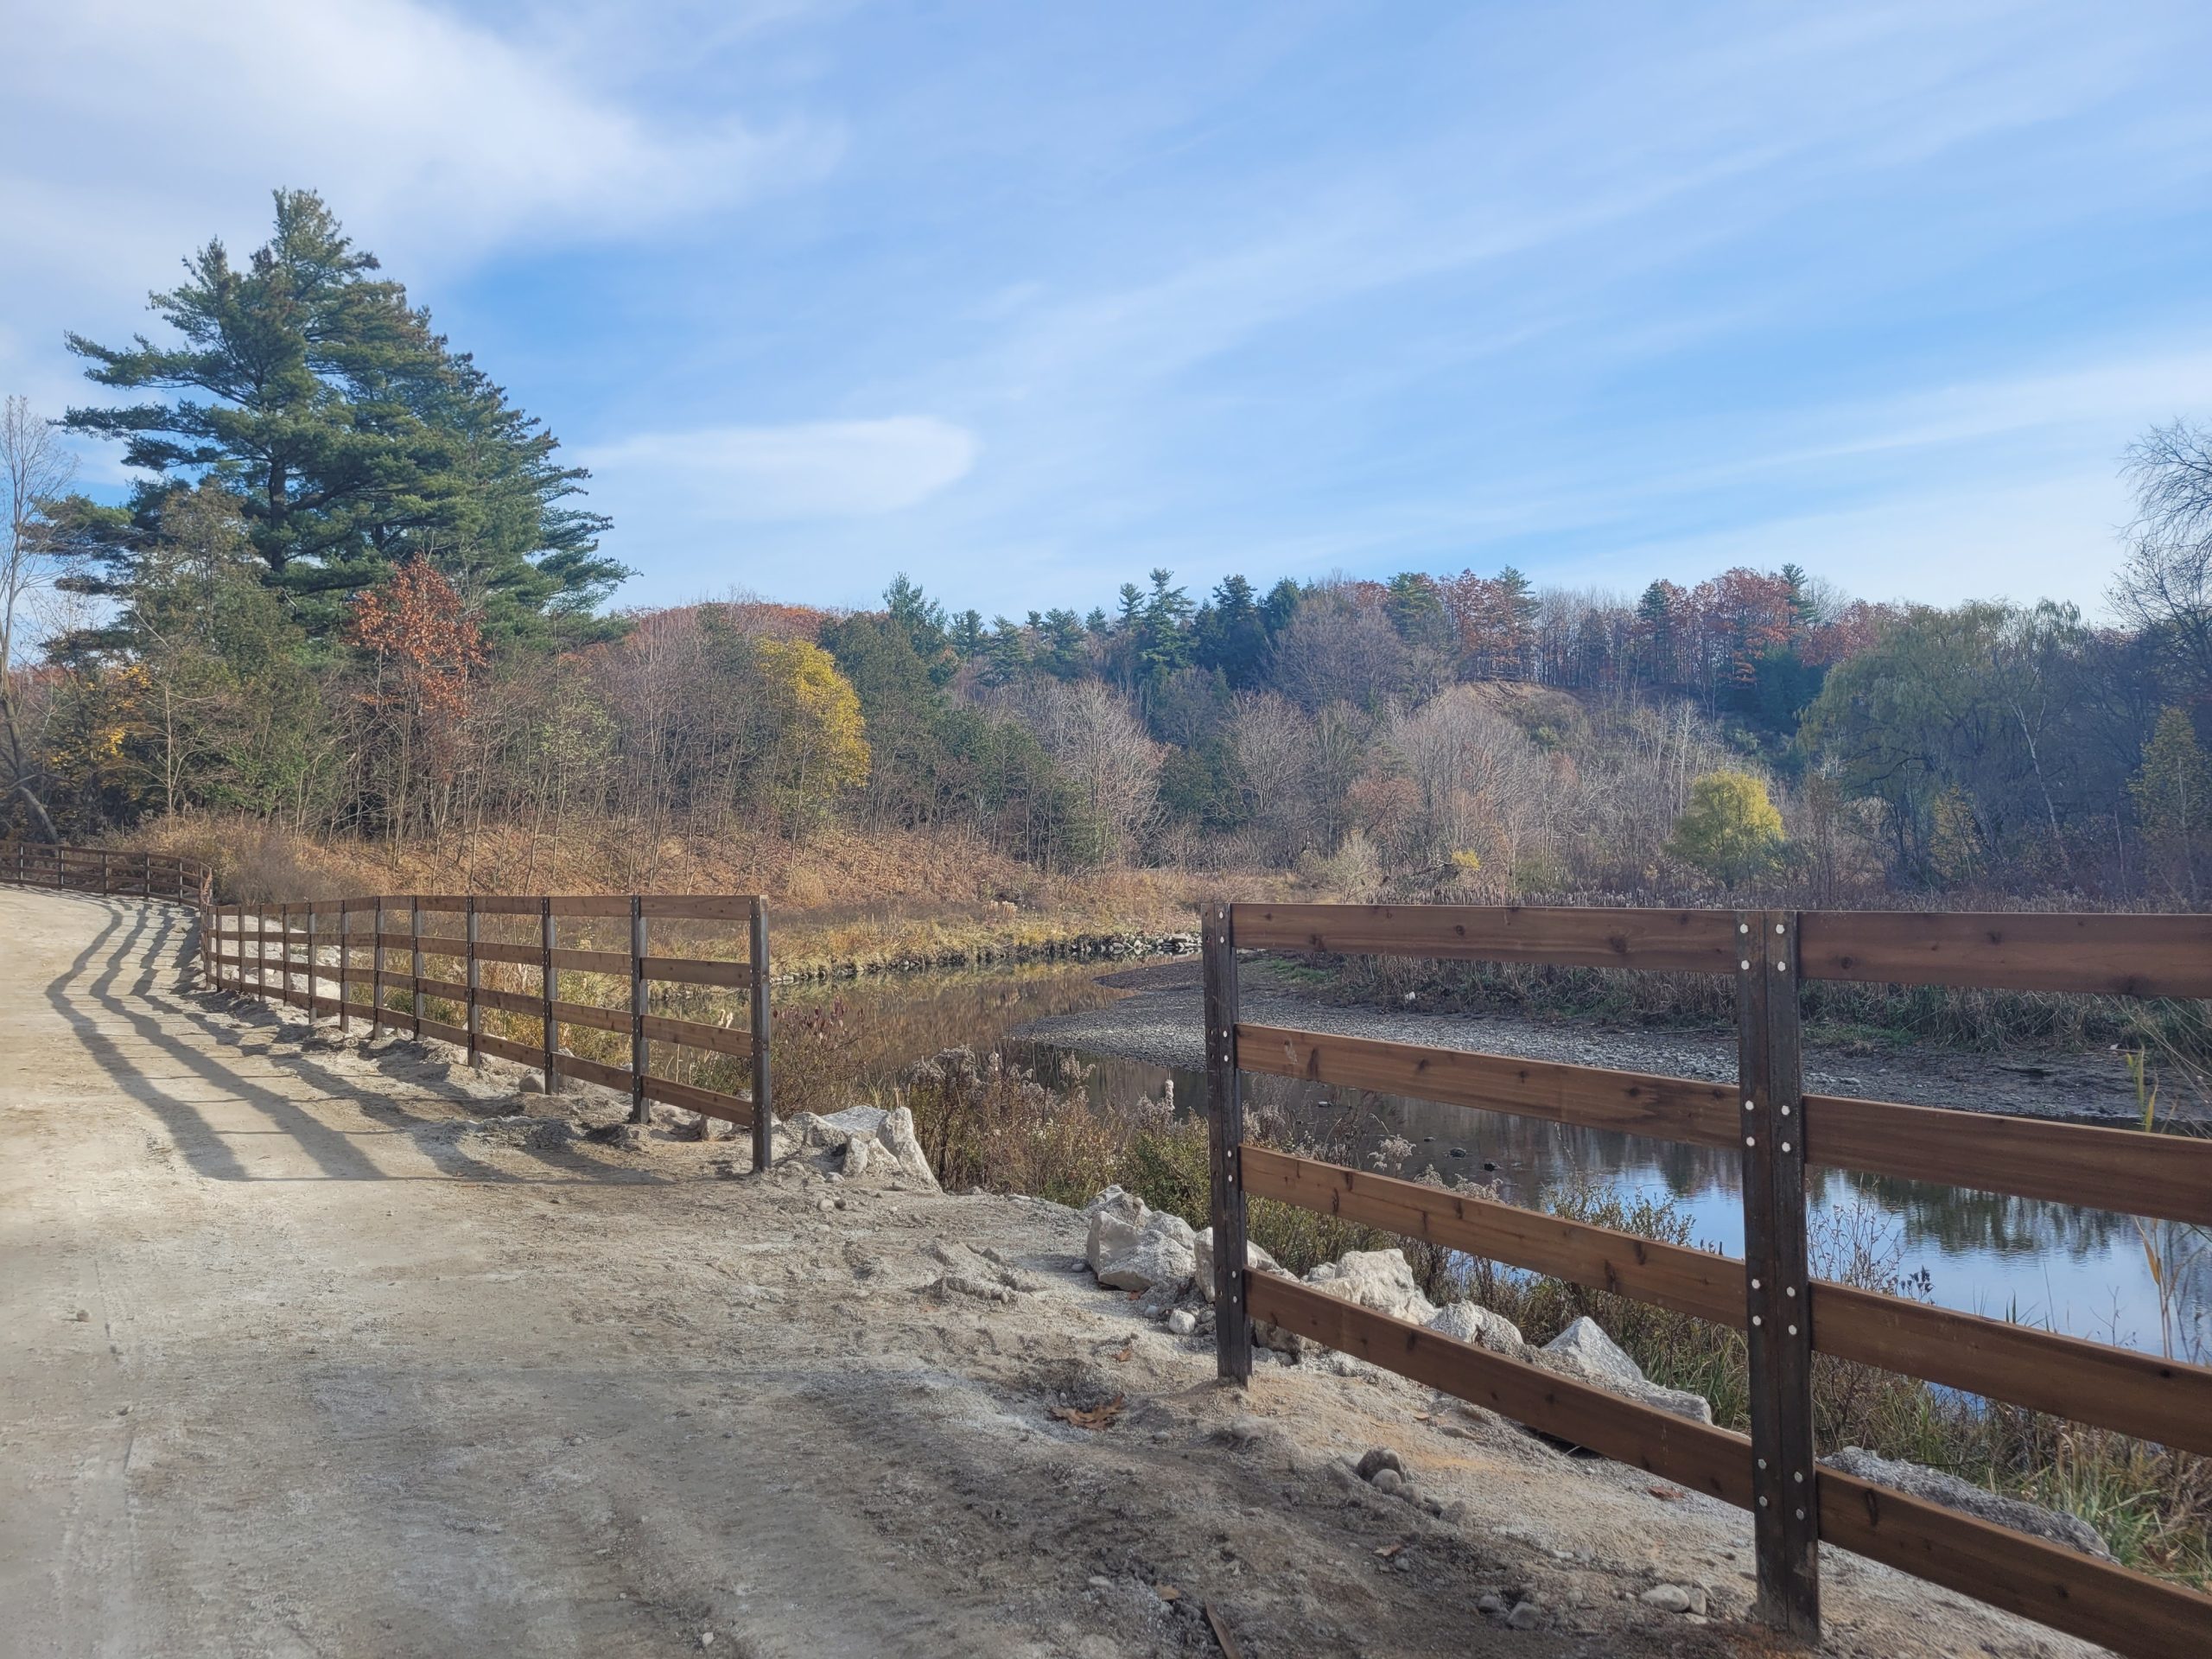 Photo of Highland Creek Trail during Phase 3A construction showing an unpaved trail path next to a pond divided by a wood fence under construction. Mature fall coloured trees are in the background. 